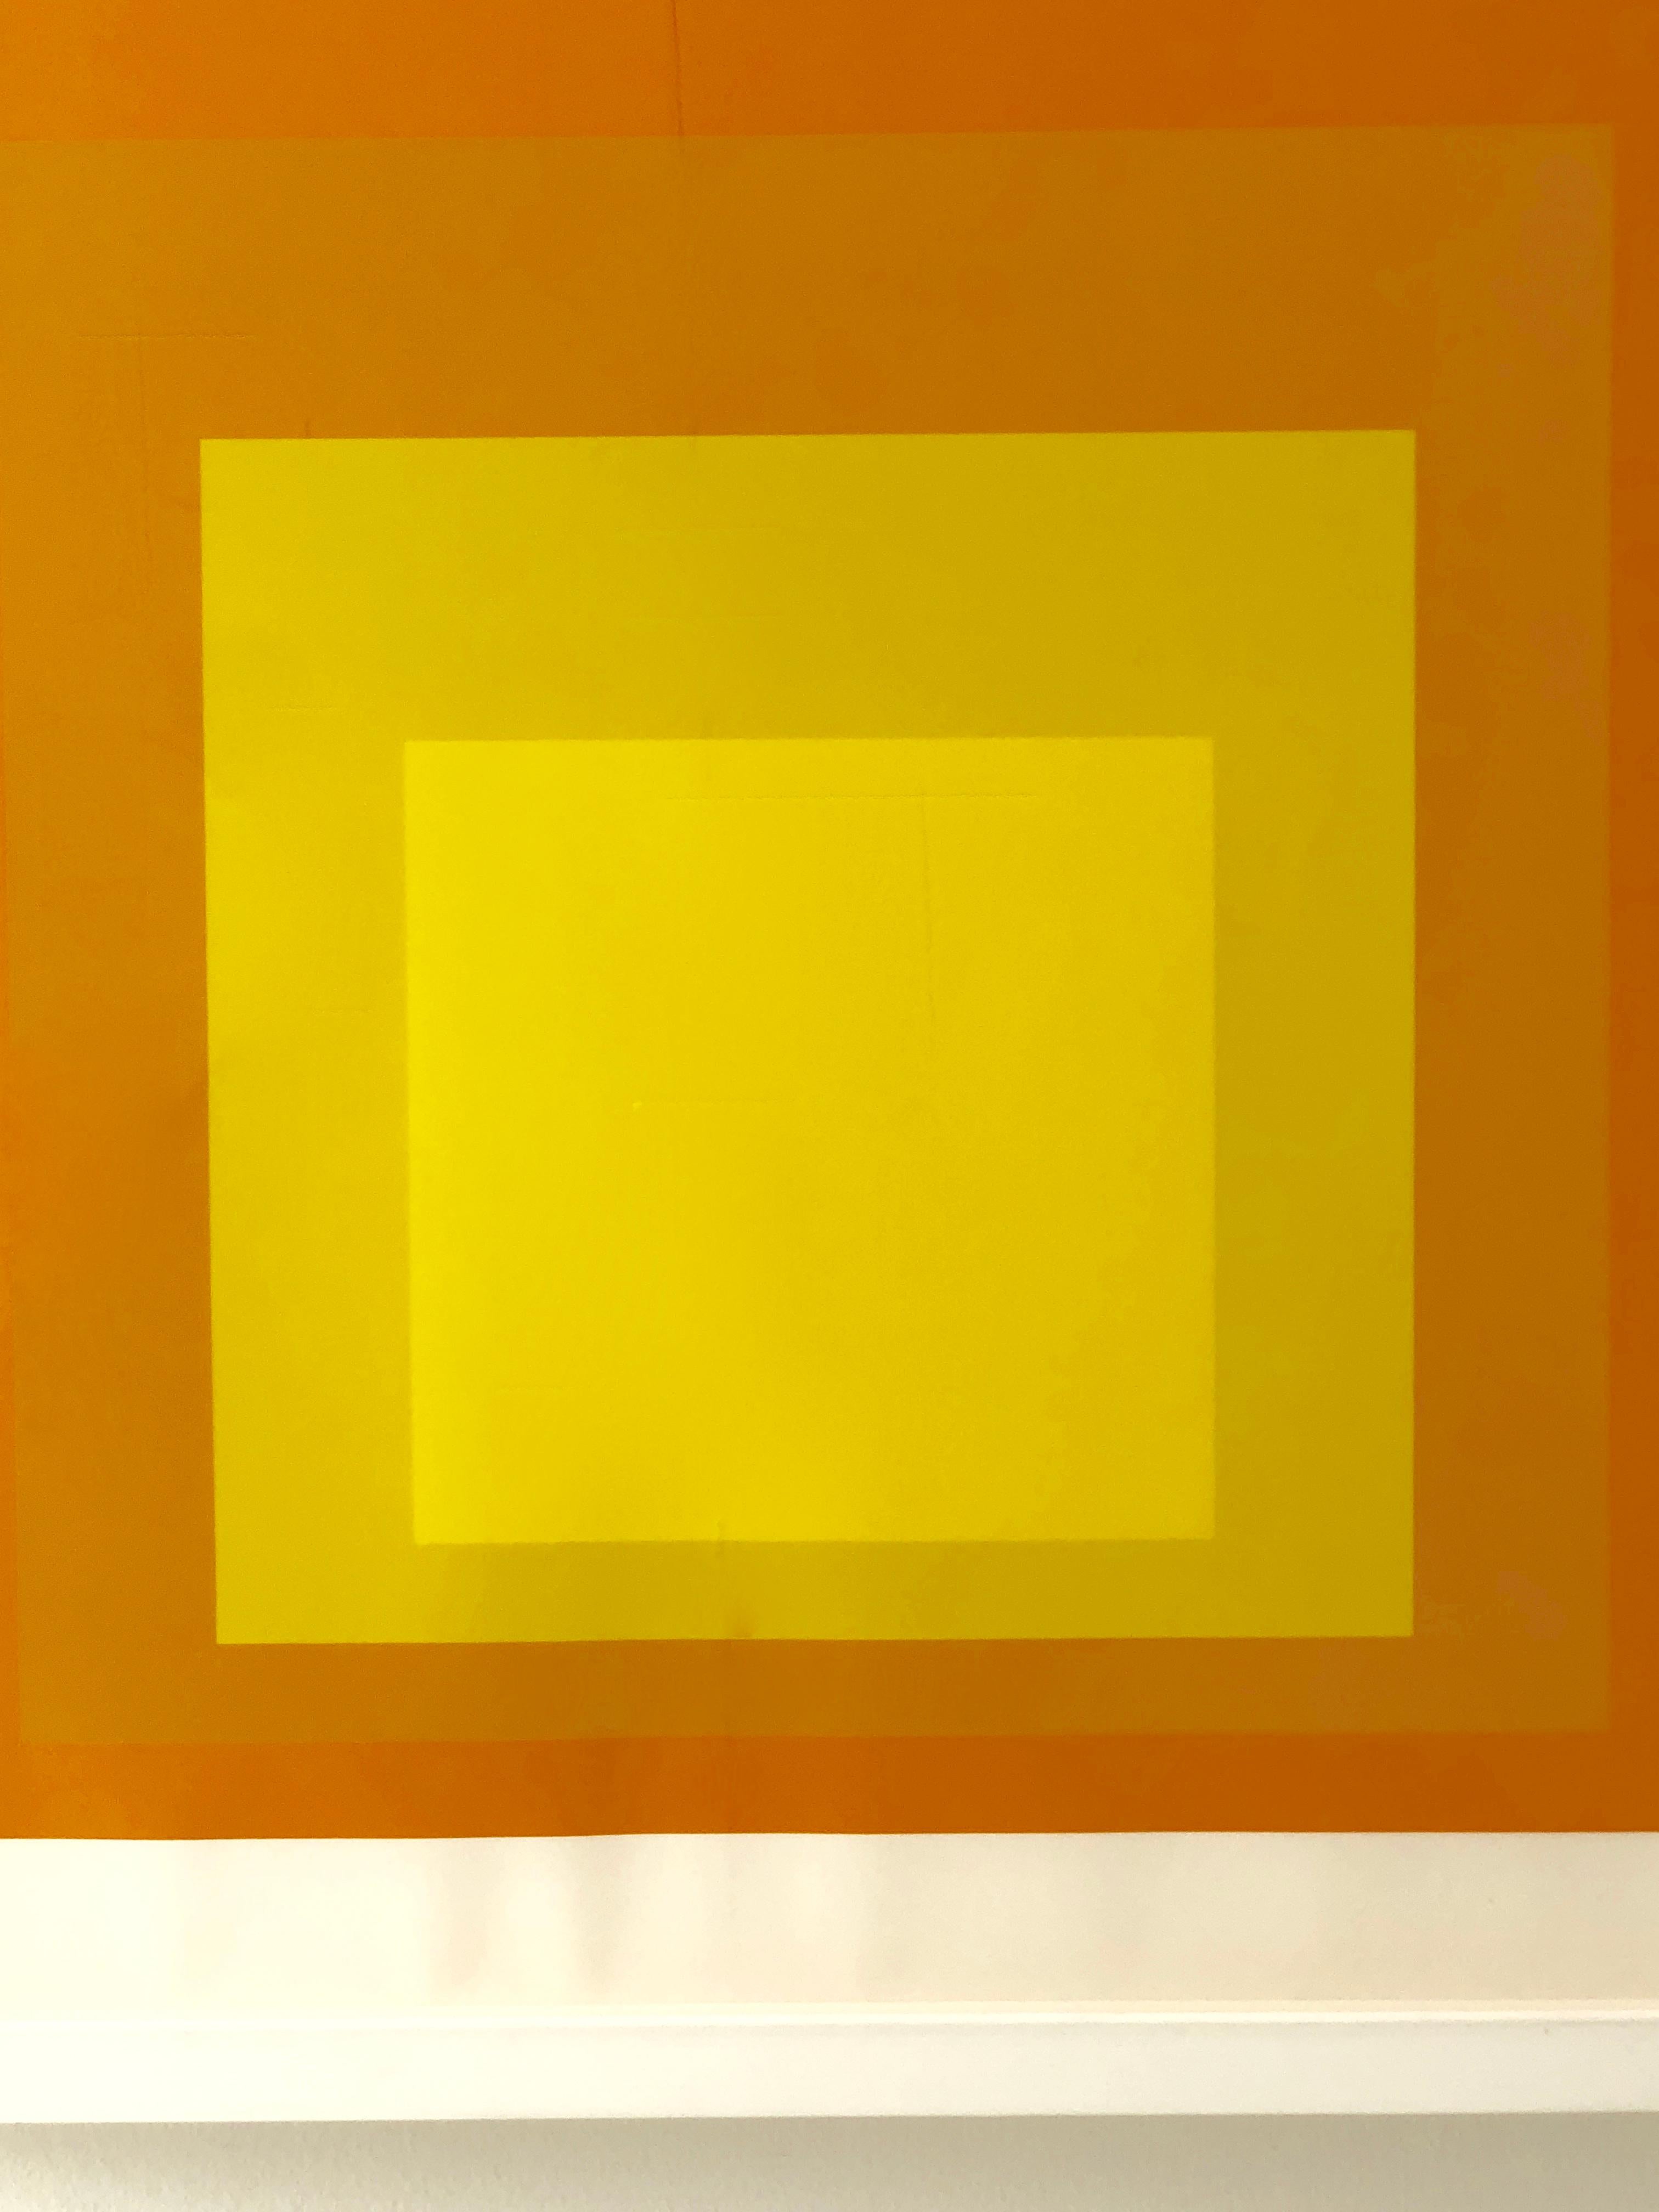 Paint Albers Yellow and Oranges Silkscreen, Interaction of Color Homage to the Square